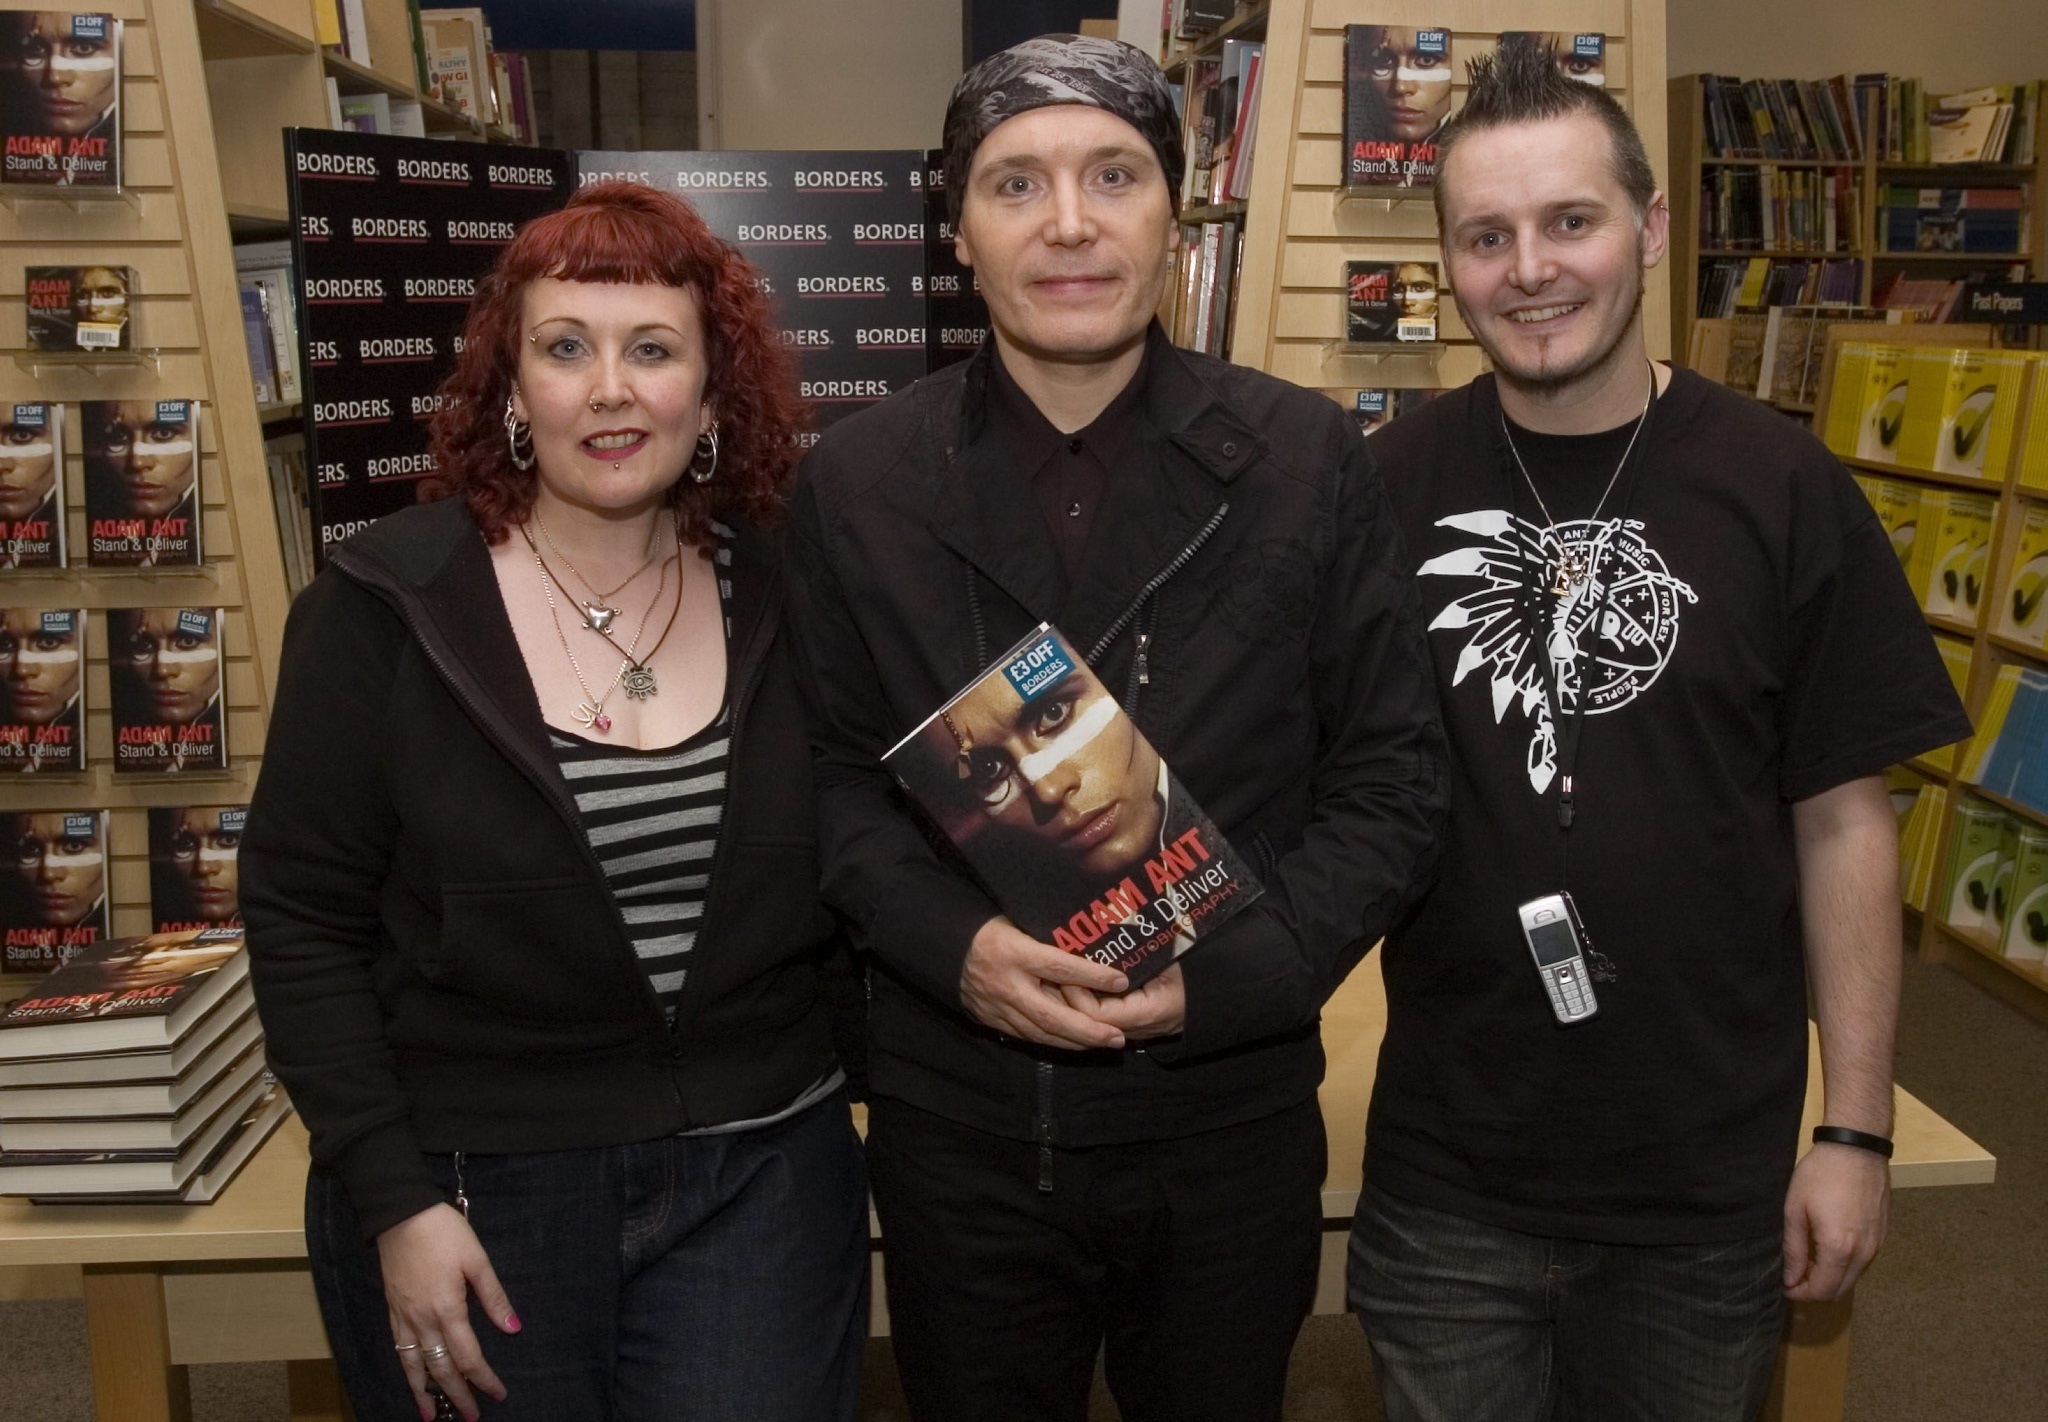 When Glasgow couple got Adam Ant's 'blessing' in city's Borders bookstore